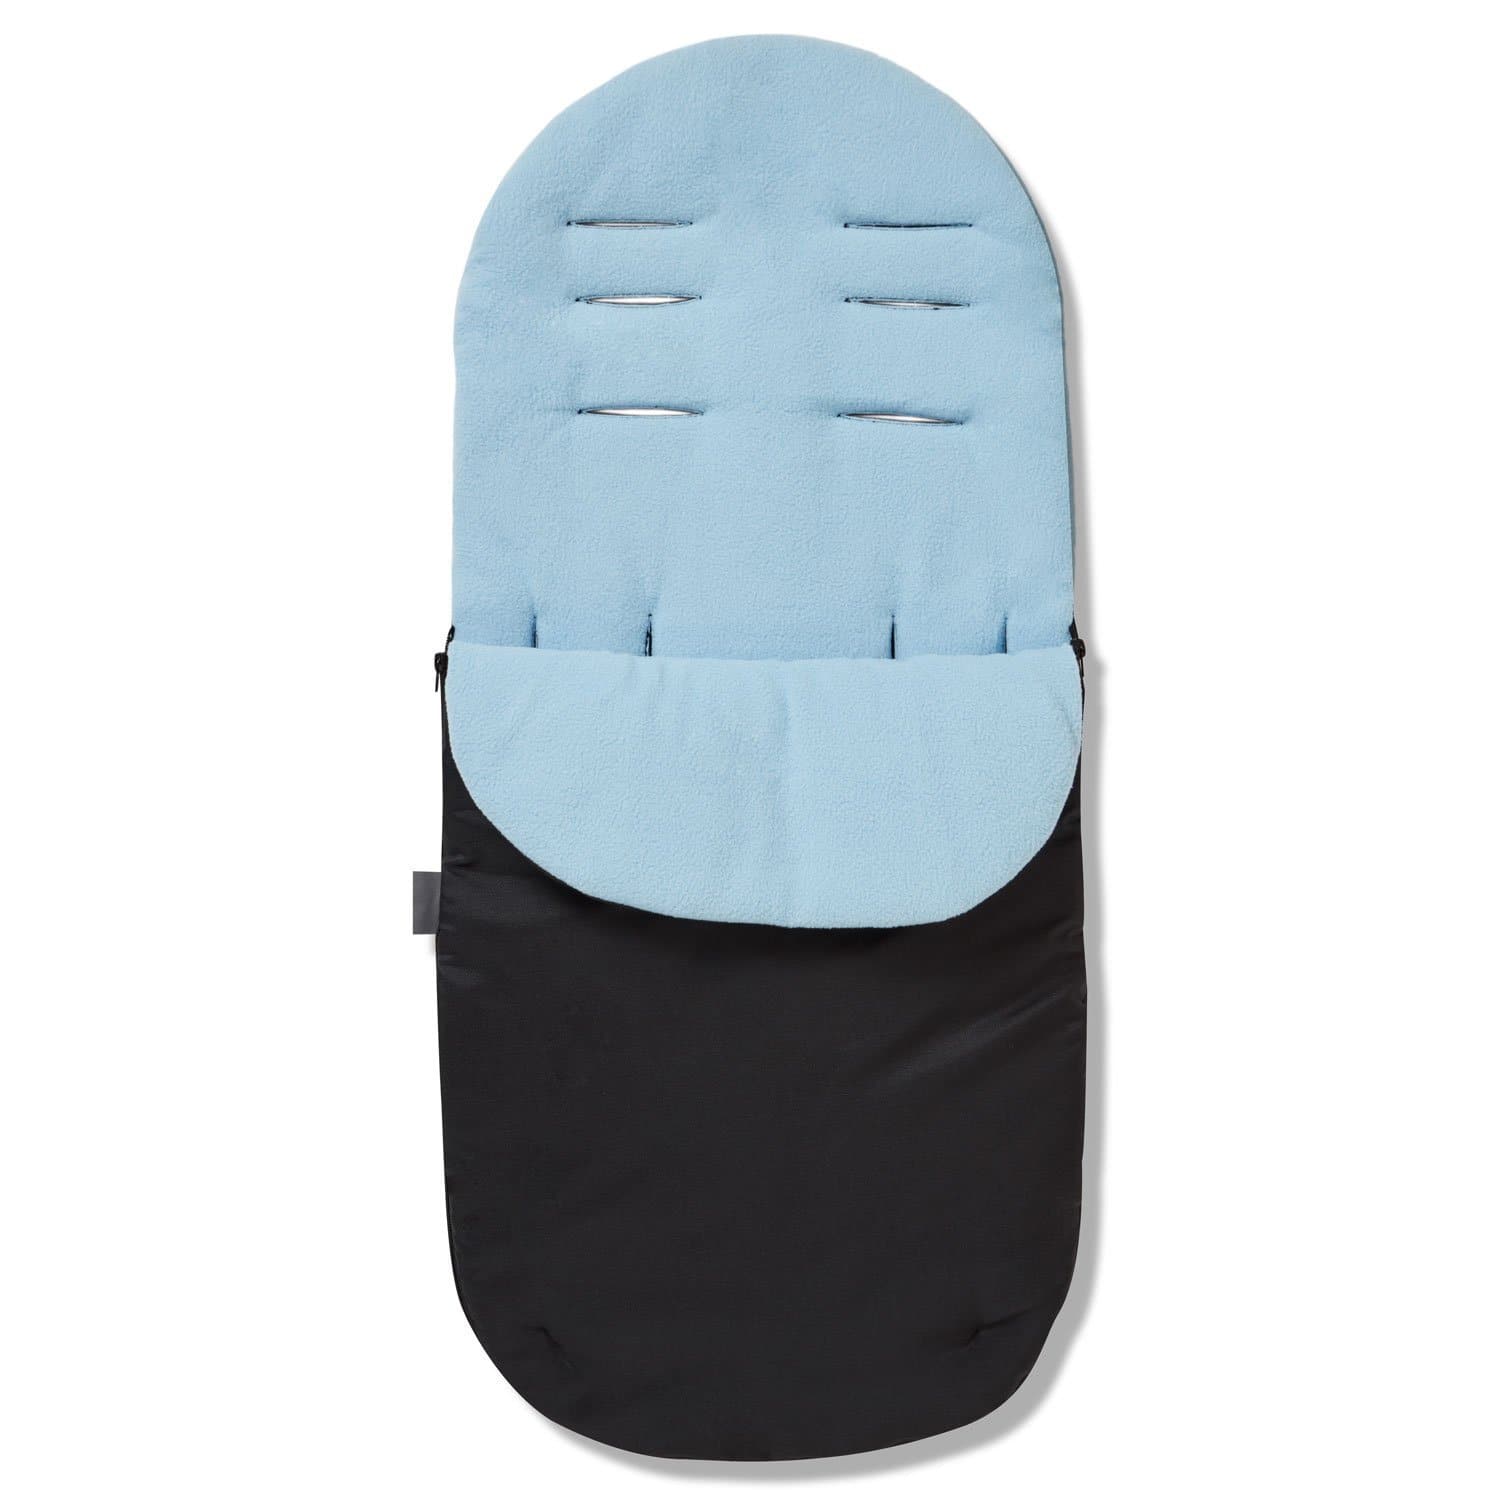 Footmuff / Cosy Toes Compatible with Esprit - Light Blue / Fits All Models | For Your Little One